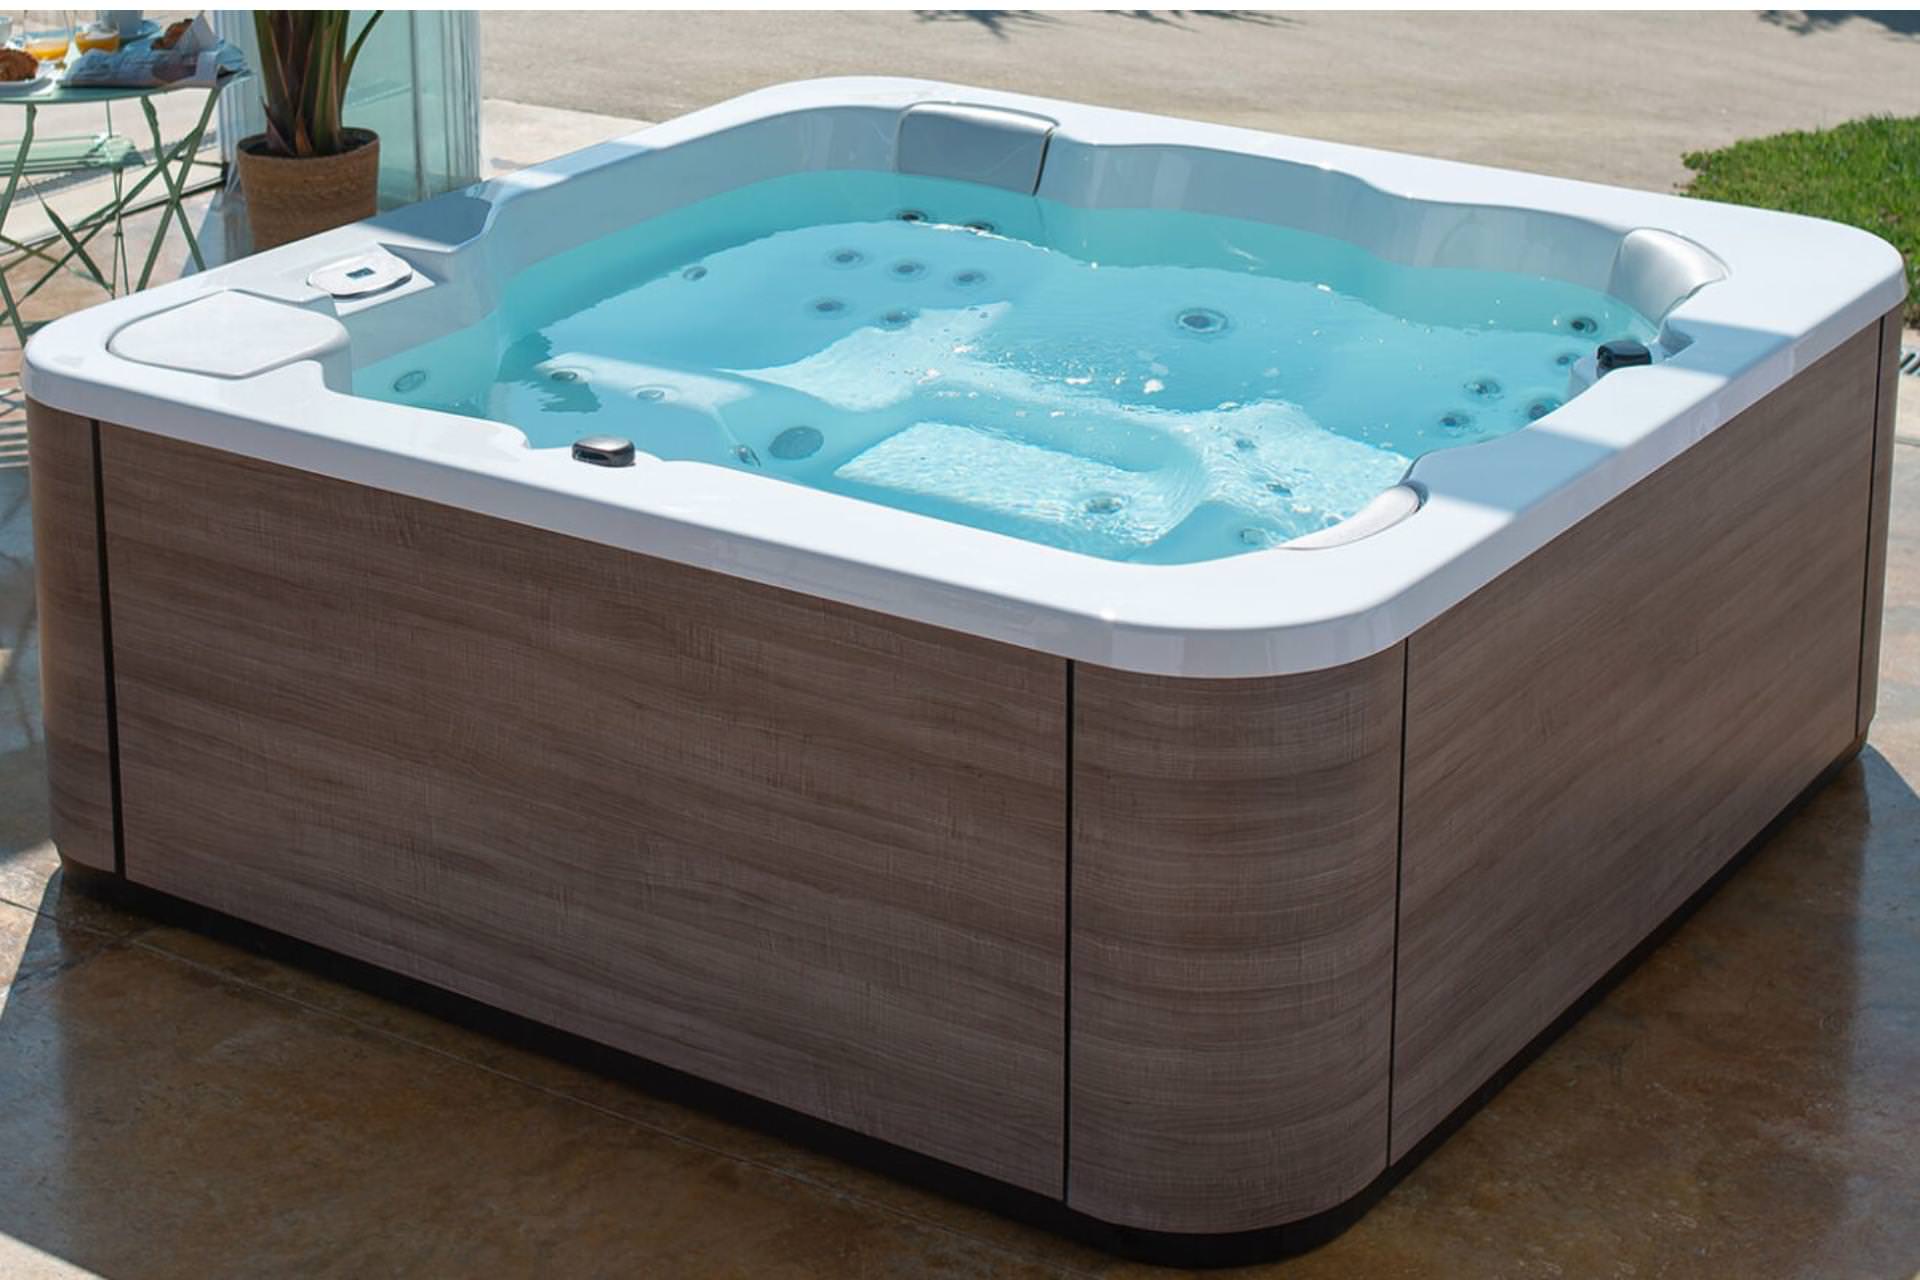 INDOOR AND OUTDOOR HYDROMASSAGE MINI POOL FOR FAMILIES